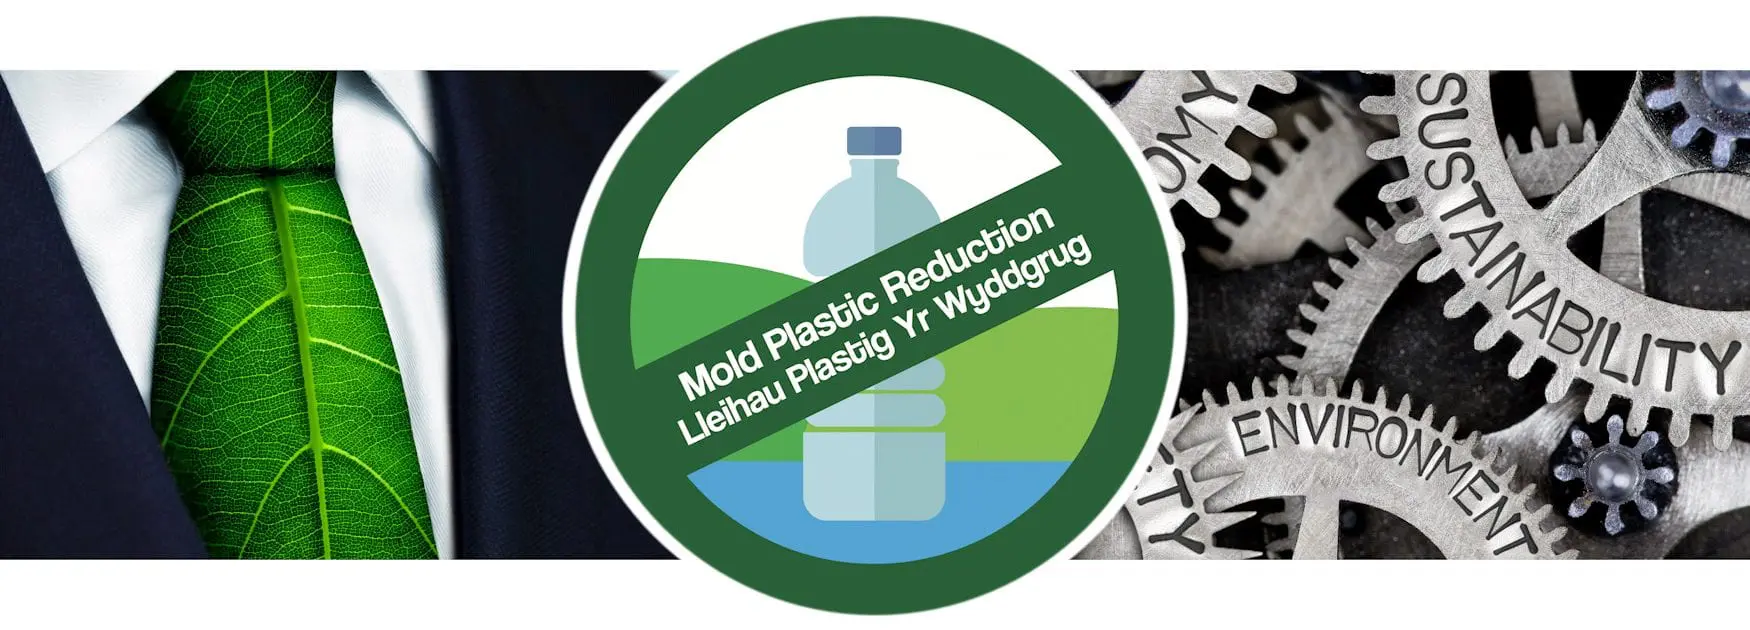 Header for Plastic Free Business Hacks page showing collage of shirt with leaf tie and cogs engraved with words including sustainability and environment